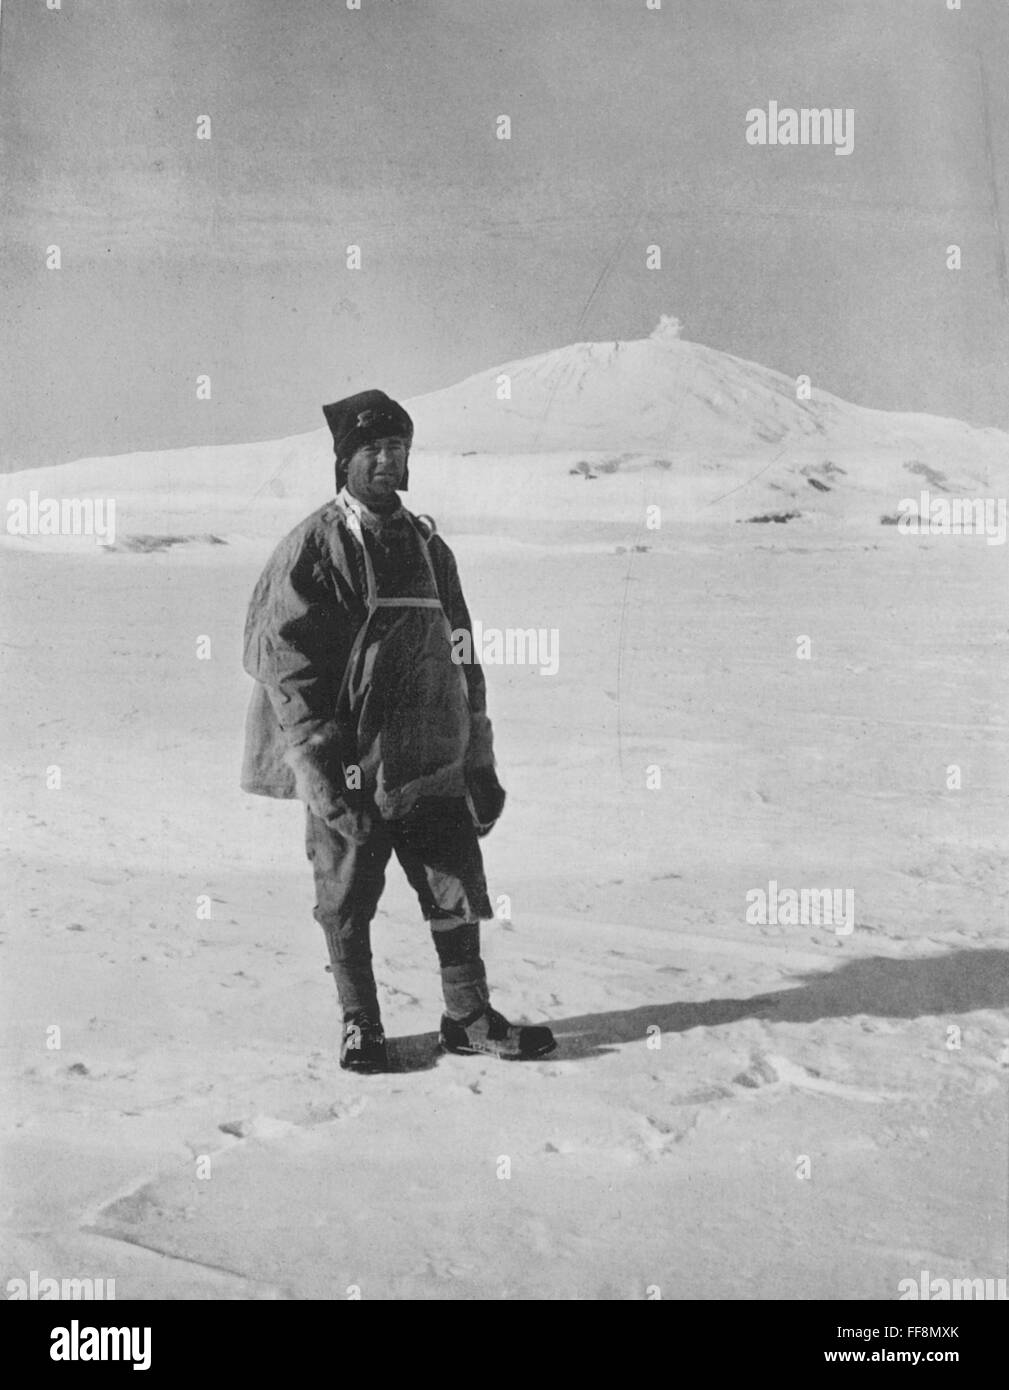 ROBERT FALCON SCOTT /n(1868-1912). English Antarctic explorer. Captain Scott, in the Antarctic with Mount Erebus in the background, on his 1910-1912 'Terra Nova' expedition. Photograph by Herbert Ponting. Stock Photo